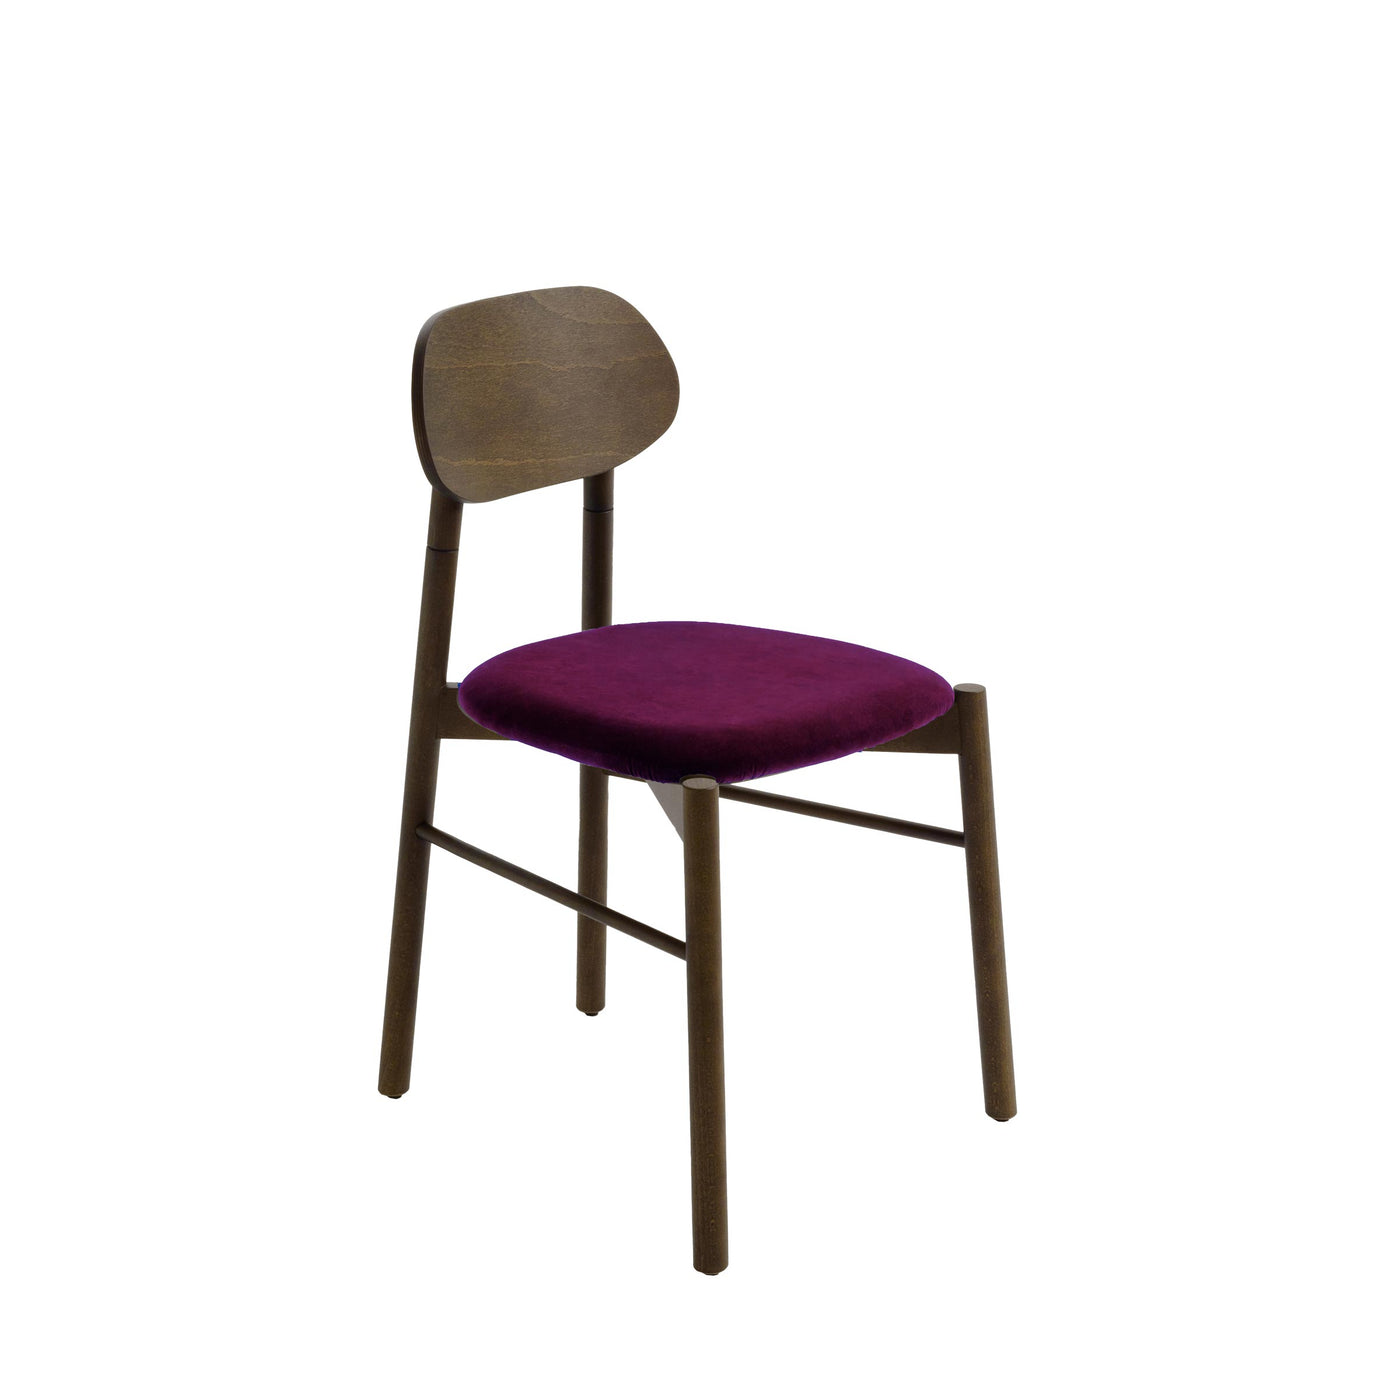 Upholstered Dining Chair BOKKEN by Bellavista + Piccini for Colé Italia 014